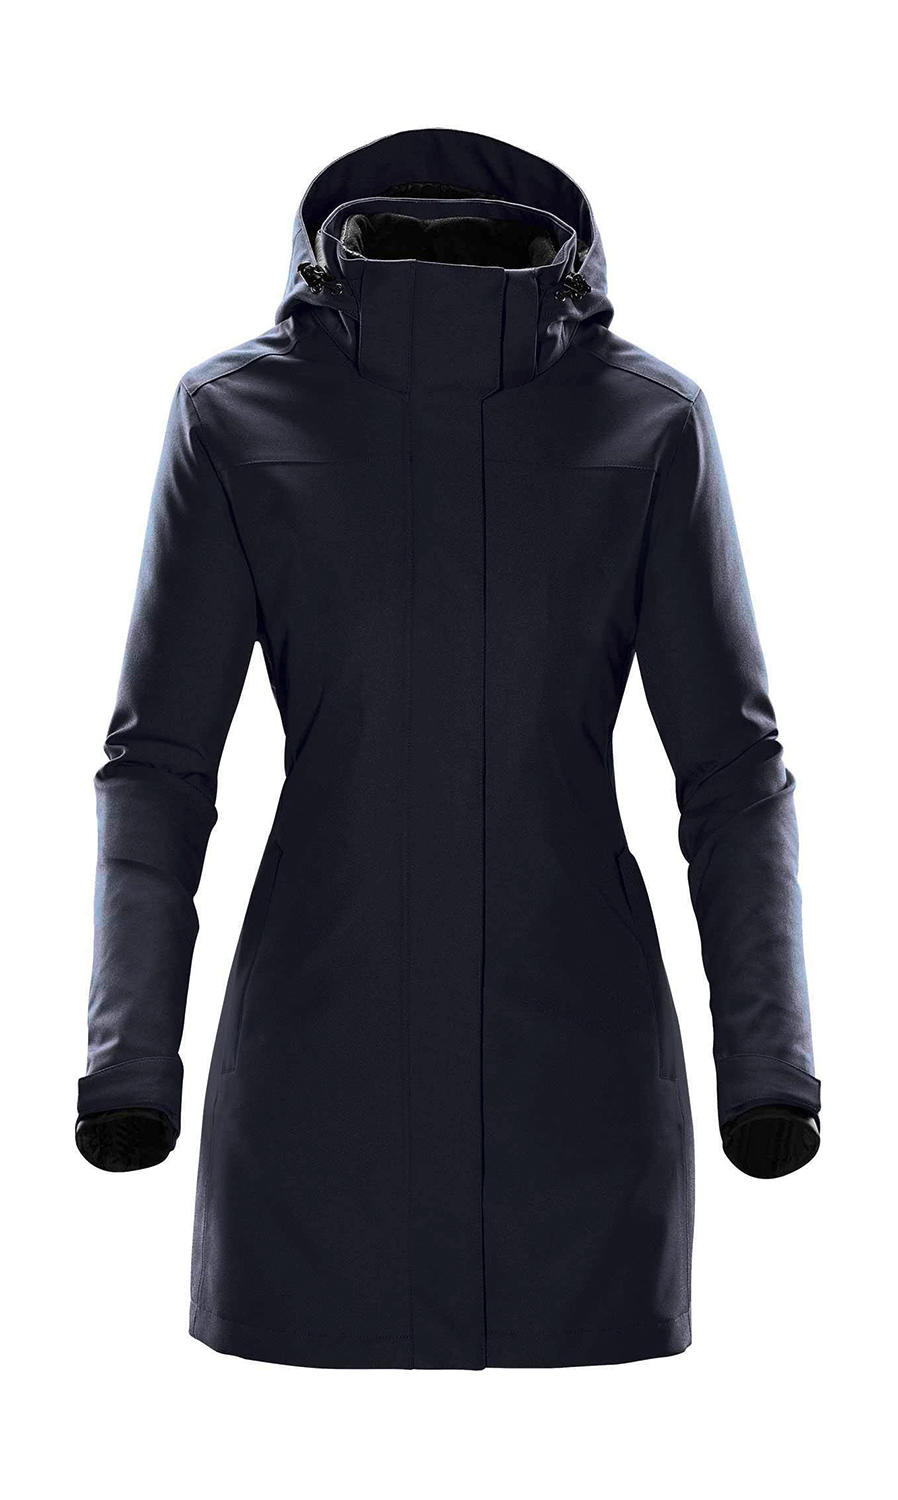  Womens Avalanche System Jacket in Farbe Navy Twill